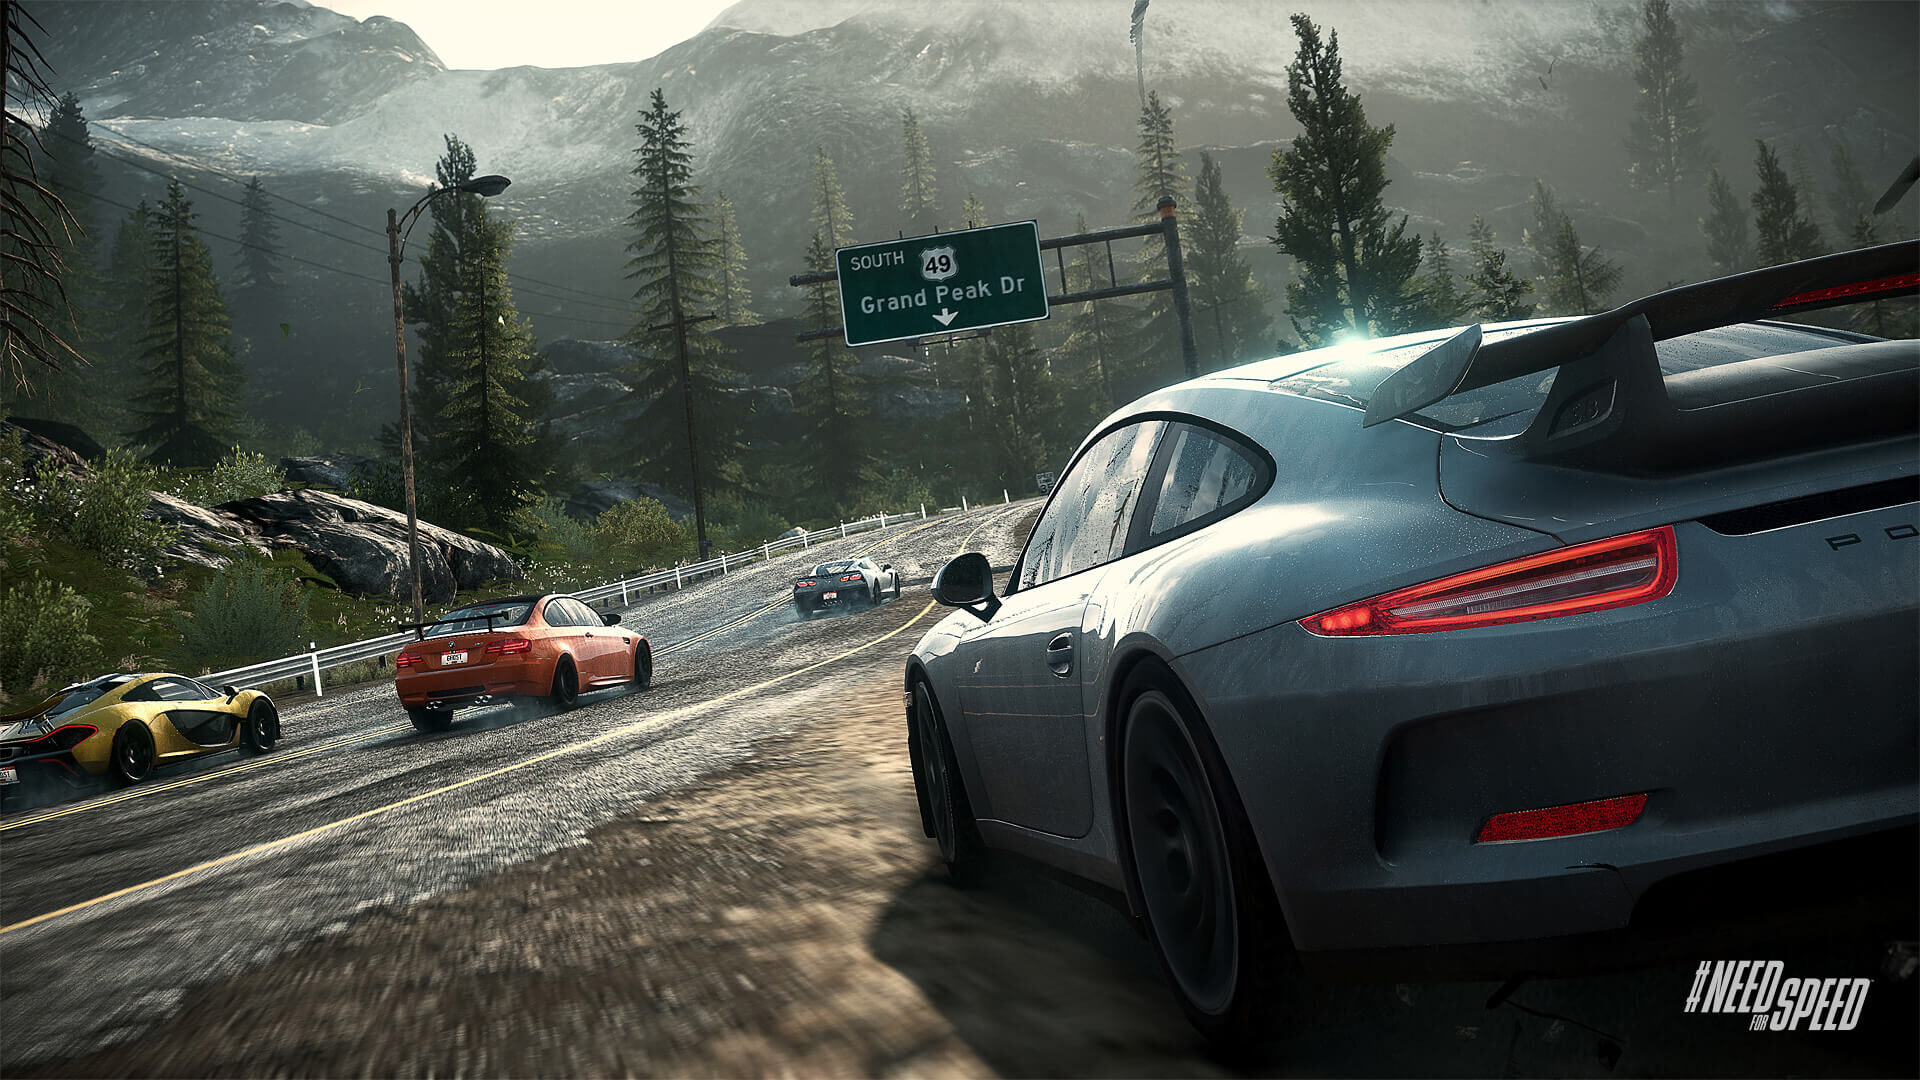 Need For Speed Rivals Complete Edition for Sale in Pumpkin Center